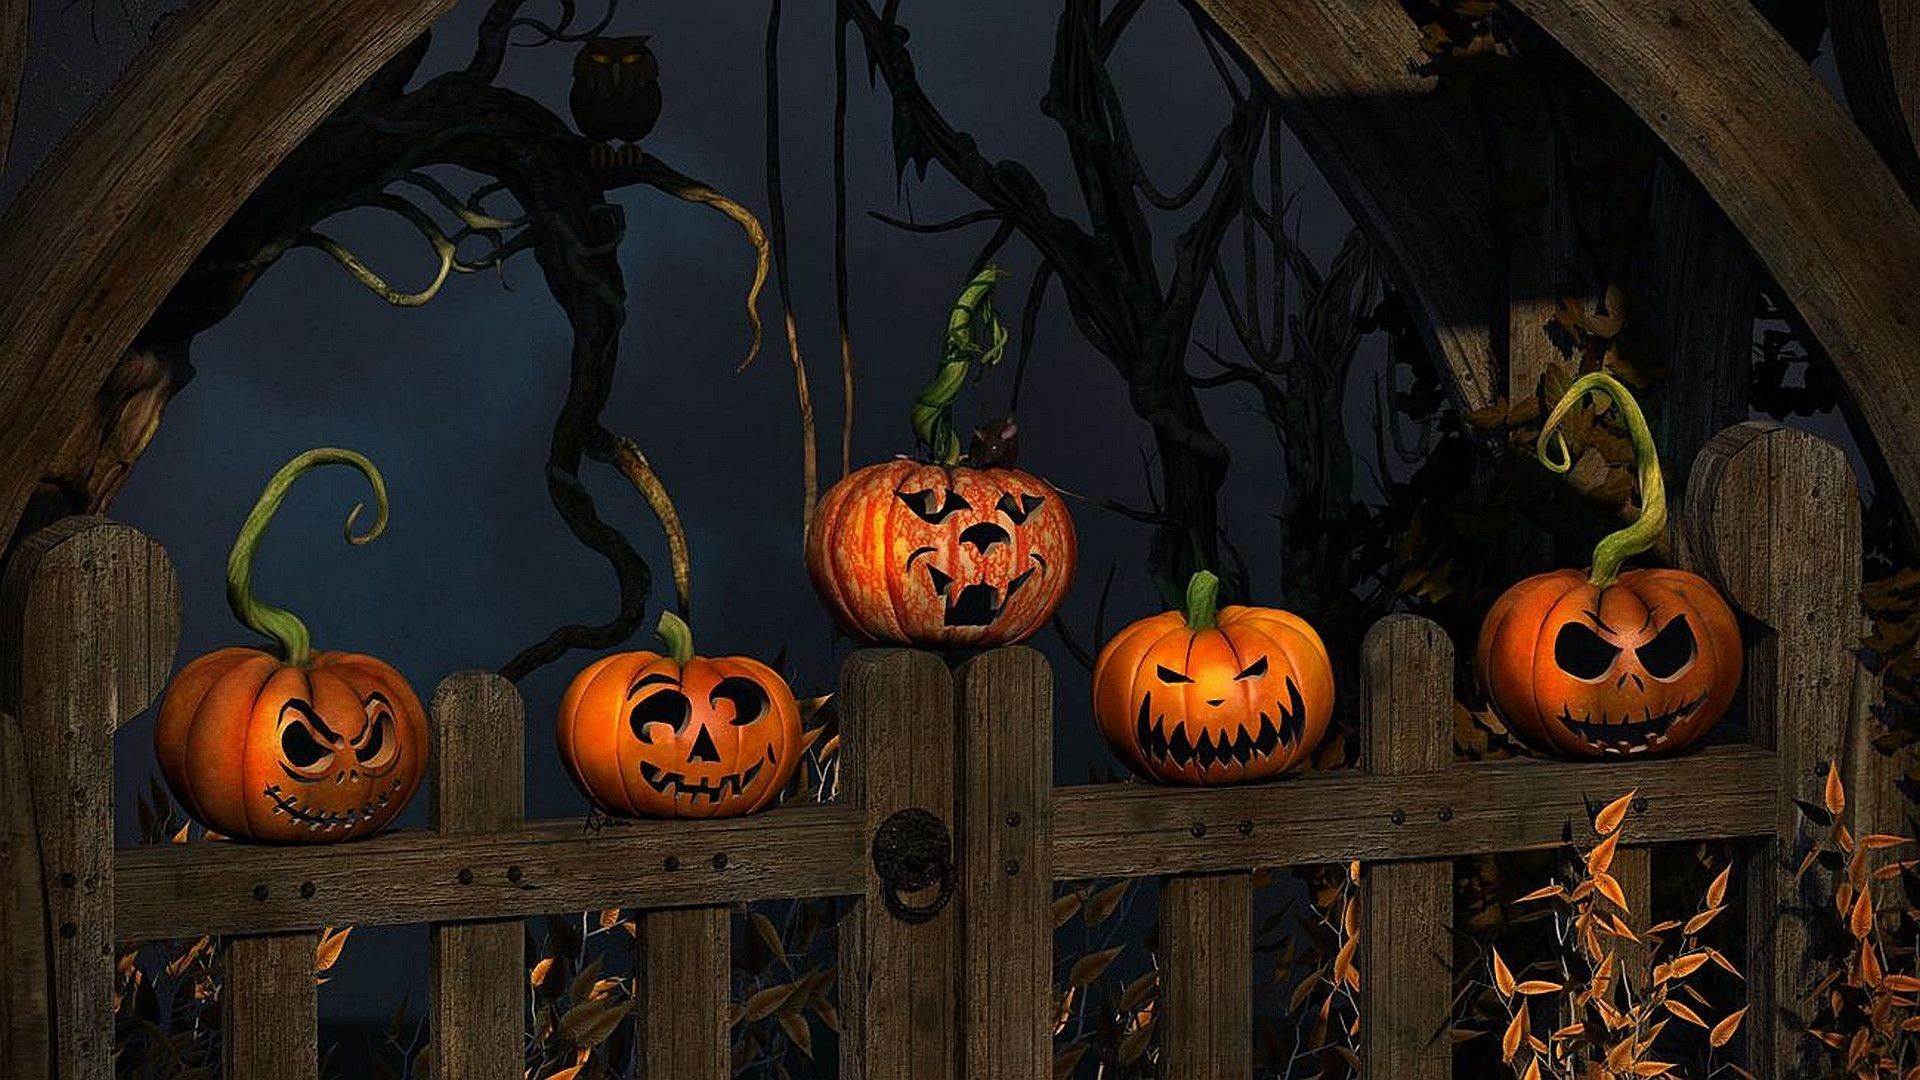 1920x1080 Halloween backgrounds pictures download.